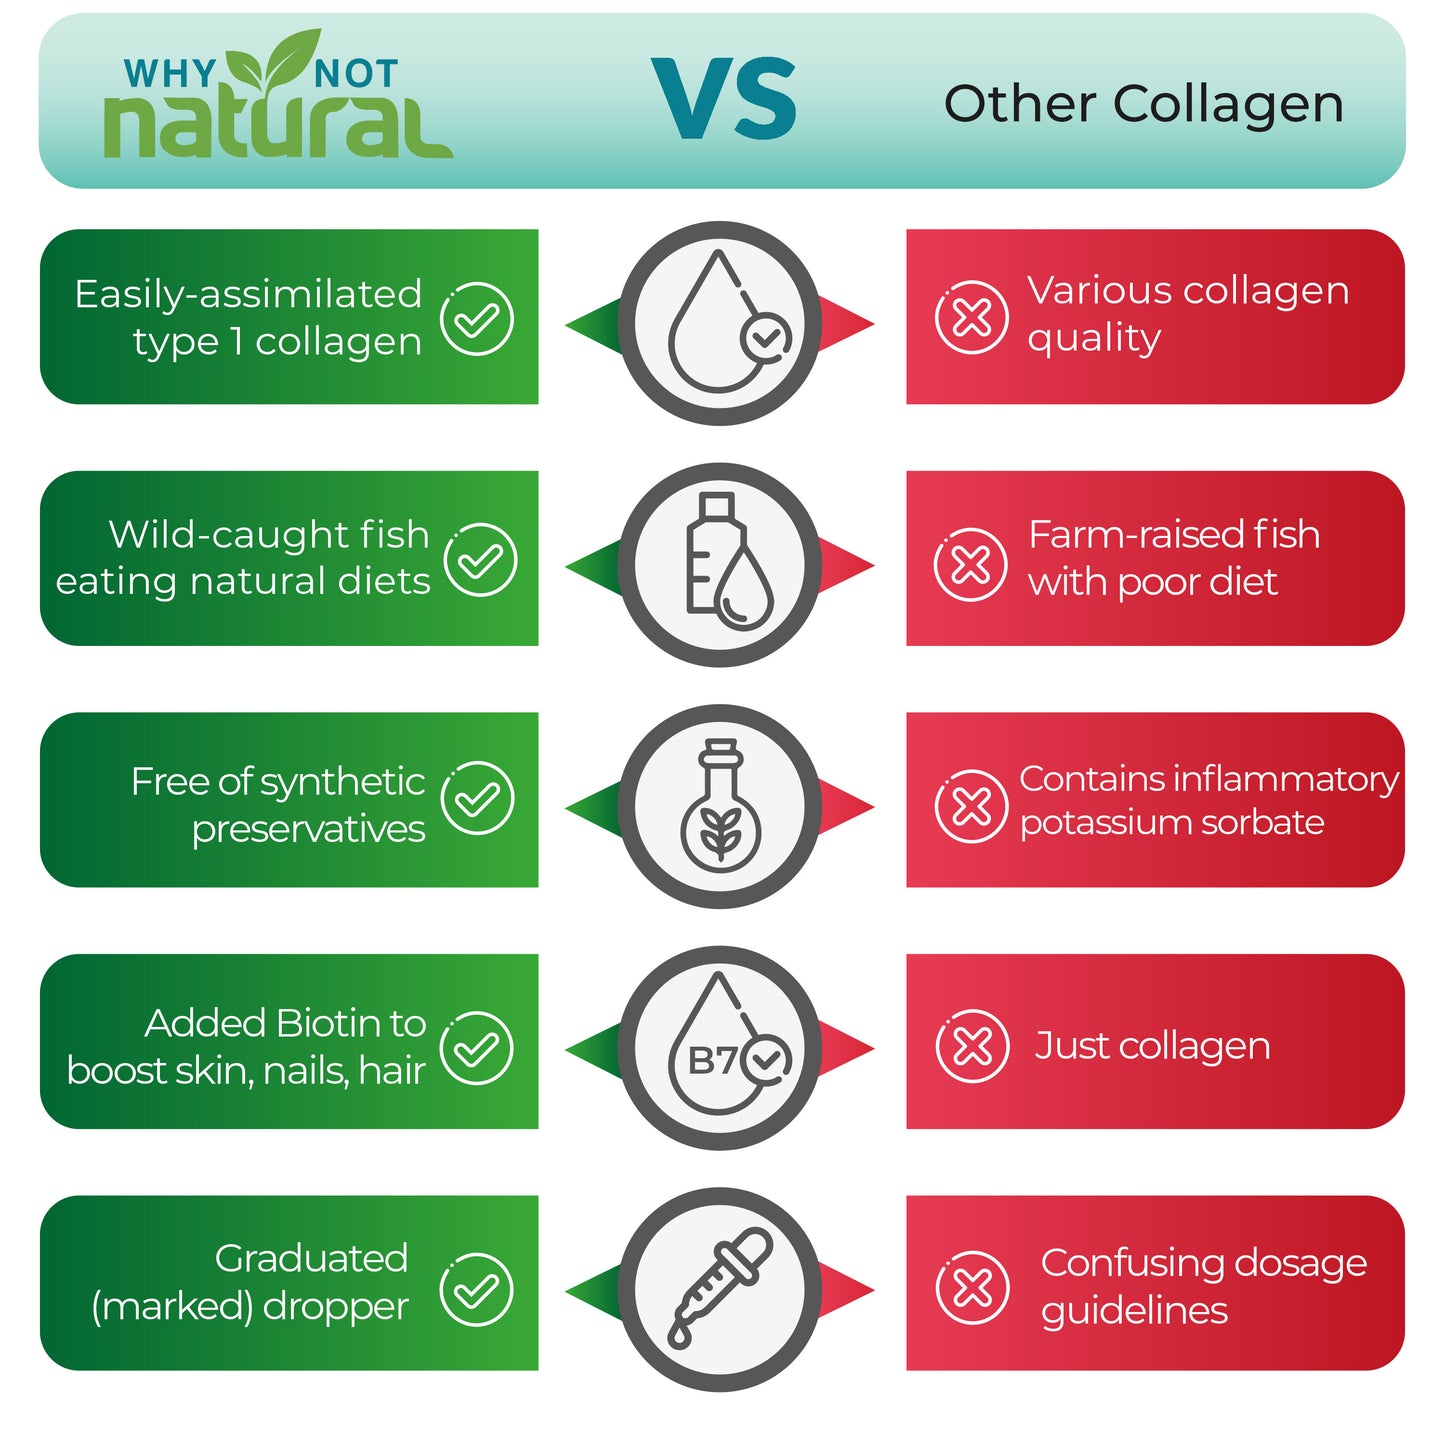 Why Not Natural vs other collagen